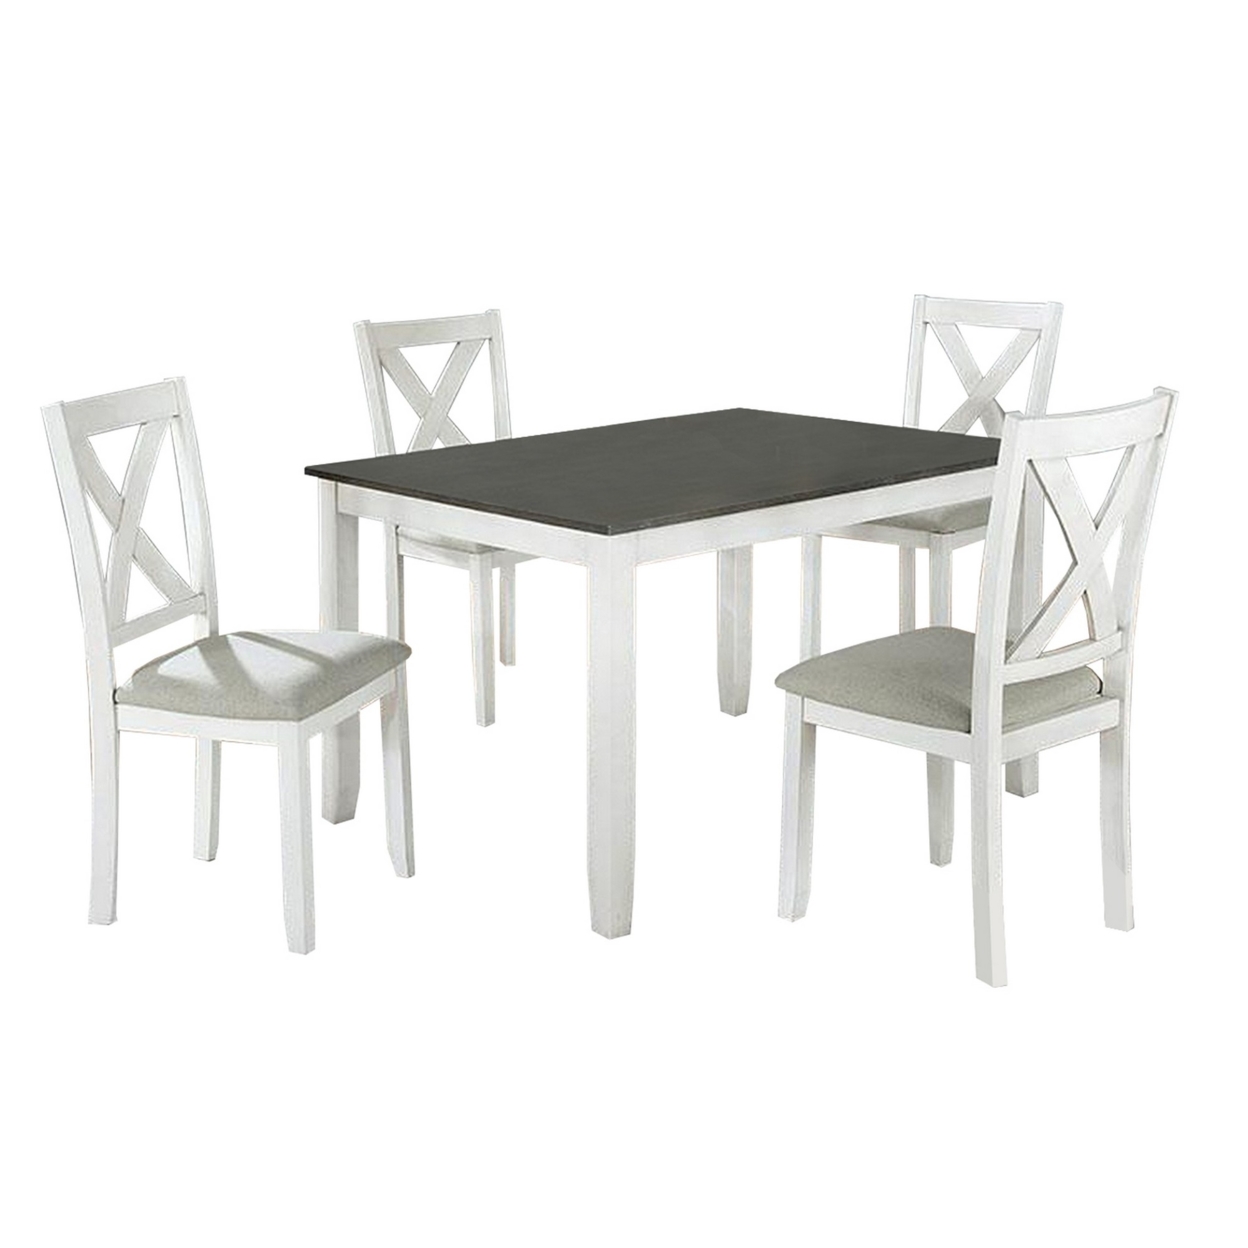 5 Piece Dining Table Set With Padded Seat And X Back, White- Saltoro Sherpi